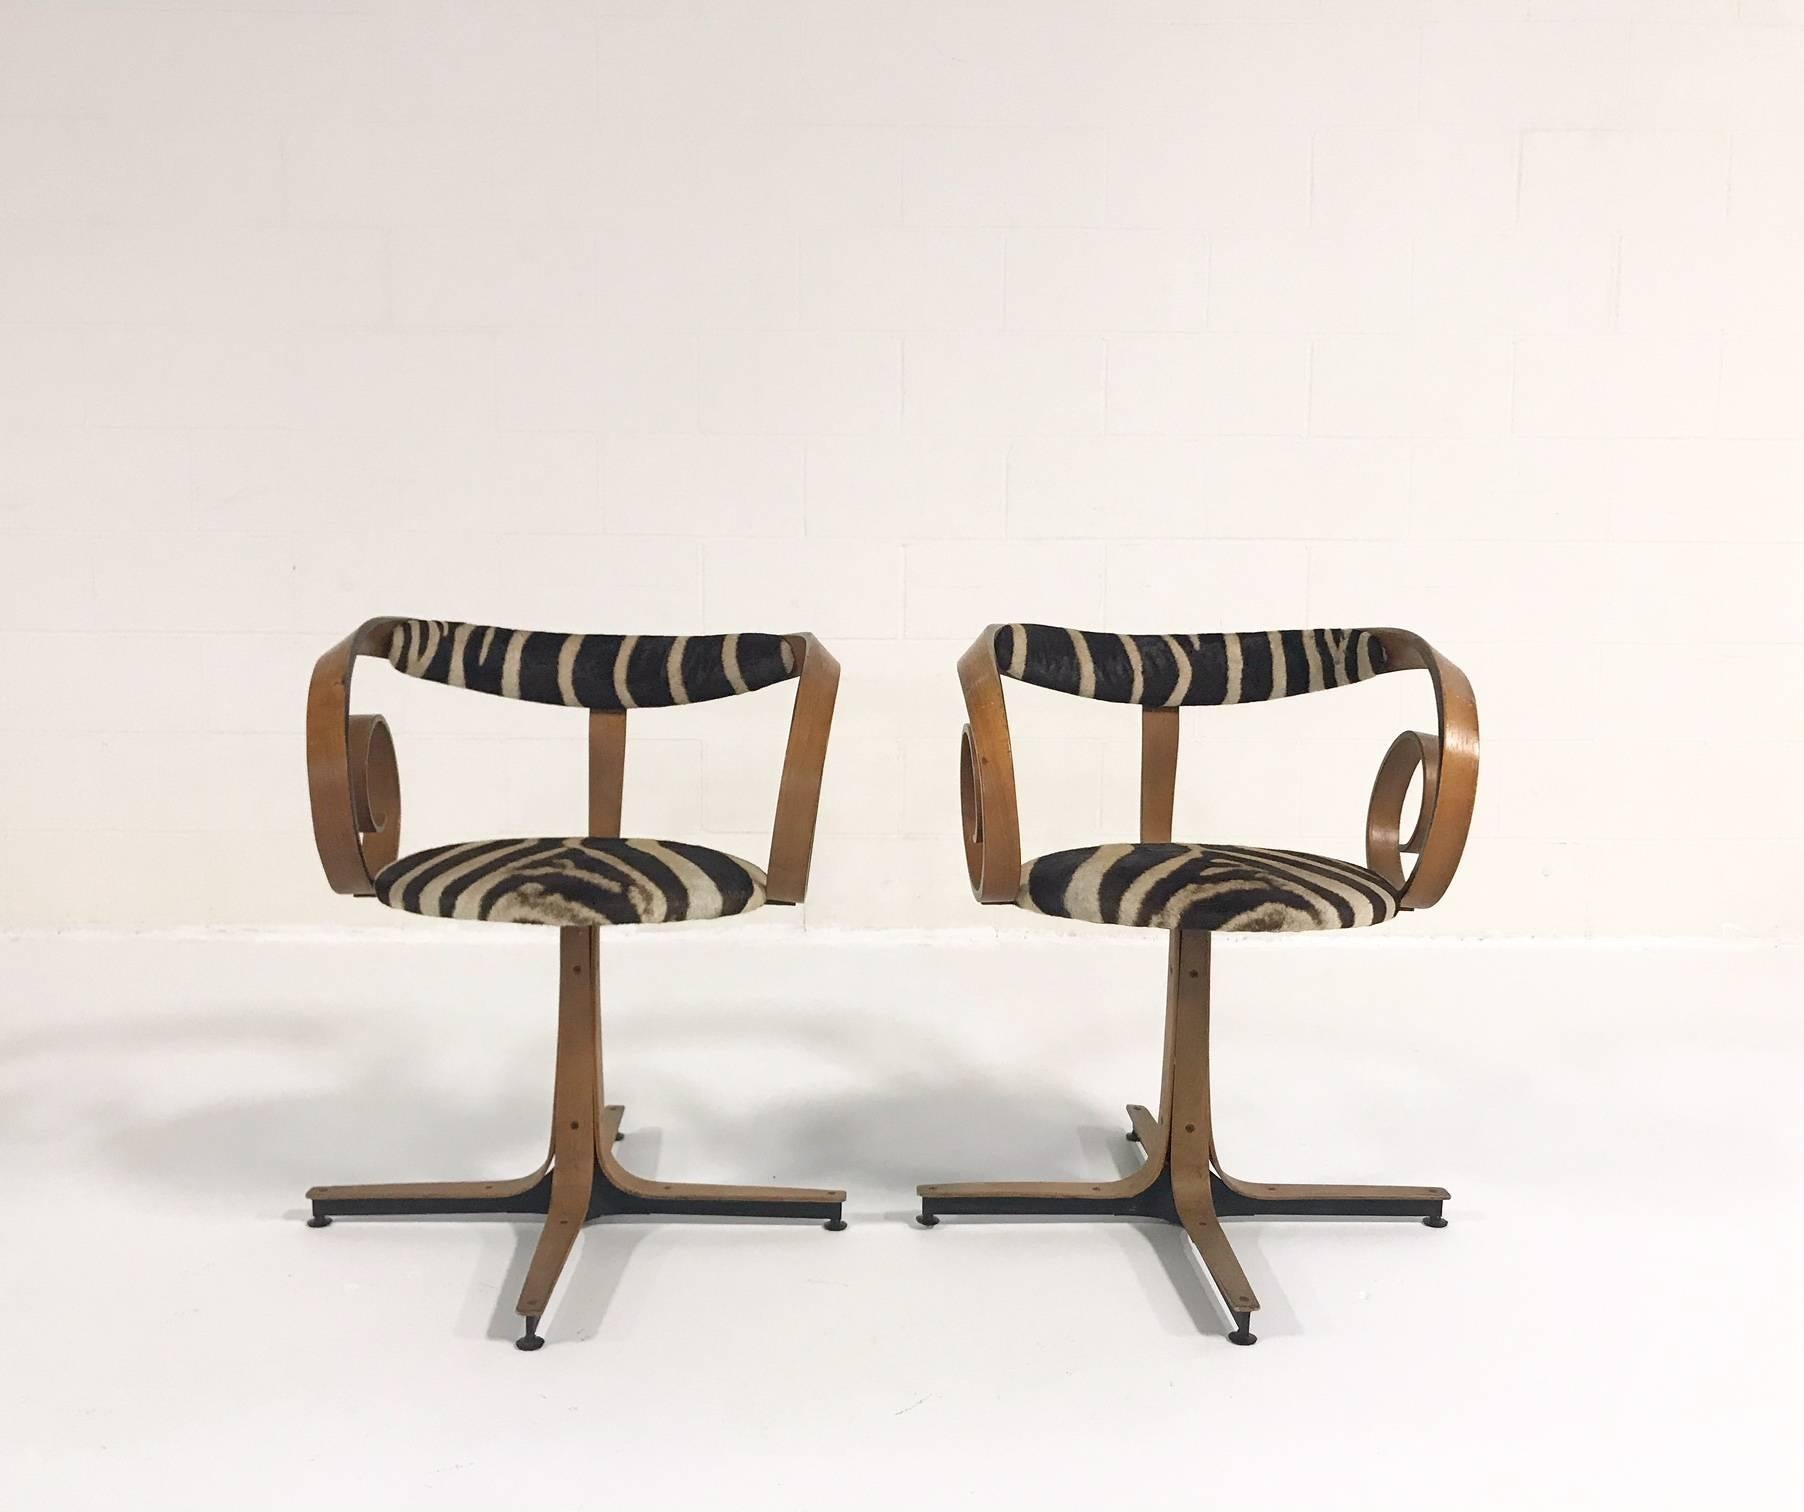 George Mulhauser for Plycraft Sultana Chairs Restored in Zebra Hide, Pair 1